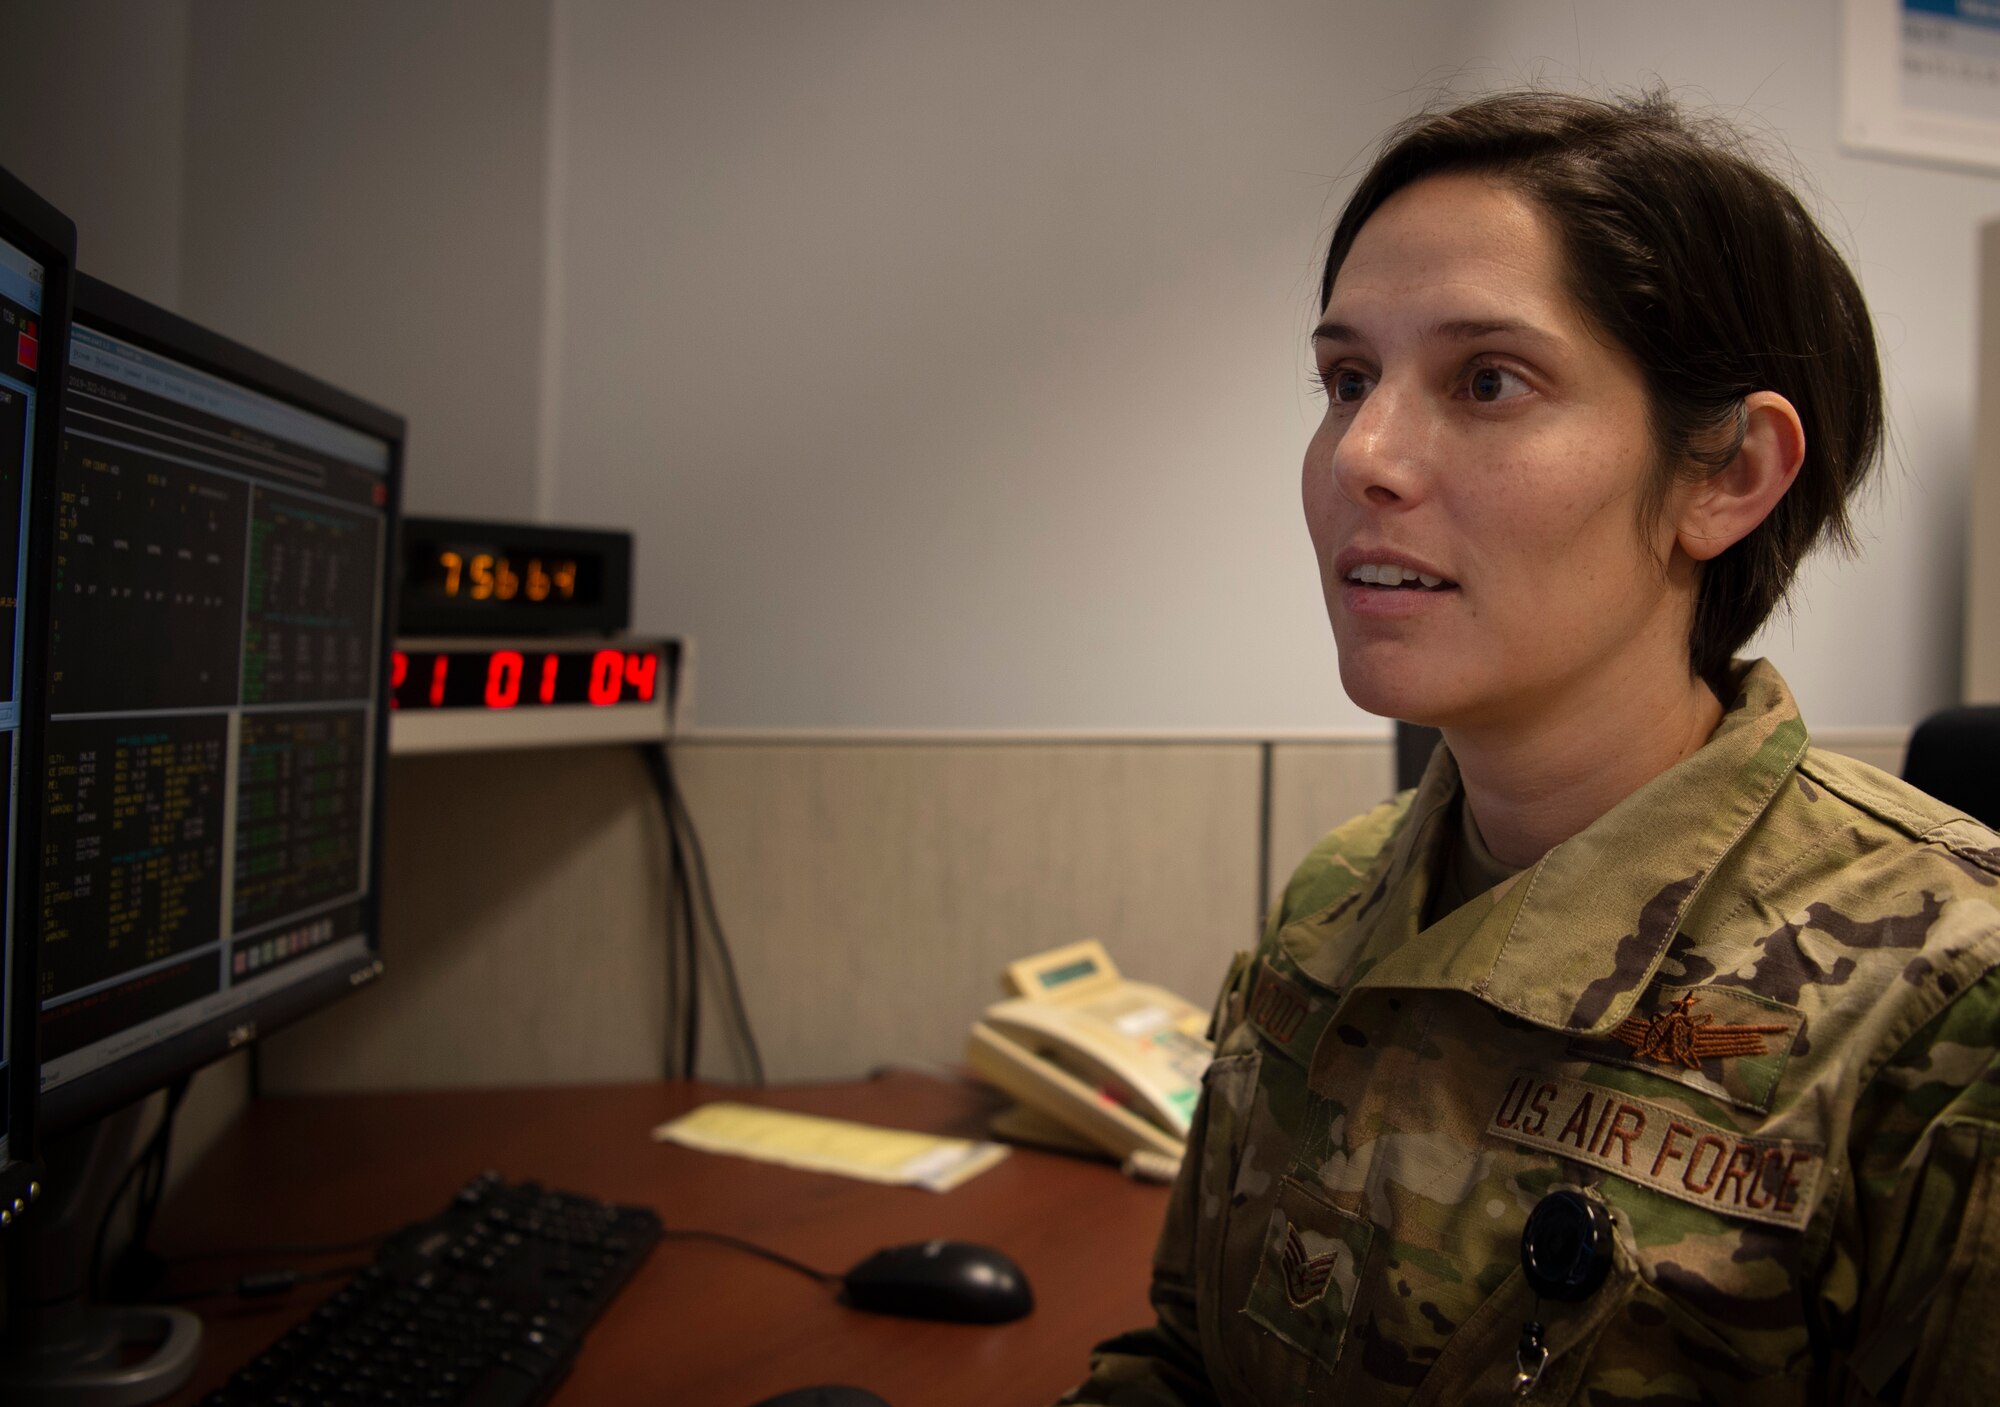 Staff. Sgt. Kesa Wood, 6th Space Operations Squadron trainee, maintains the health of a Defense Meteorological Satellite Program at Schriever Air Force Base, Colorado, Nov. 18, 2019. The DMSP is a satellite constellation that has a low Earth orbit and orbits the Earth’s poles. The satellite constellation provides meteorological and atmospheric data to government and civil agencies. (U.S. Air Force photo by Airman 1st Class Jonathan Whitely)